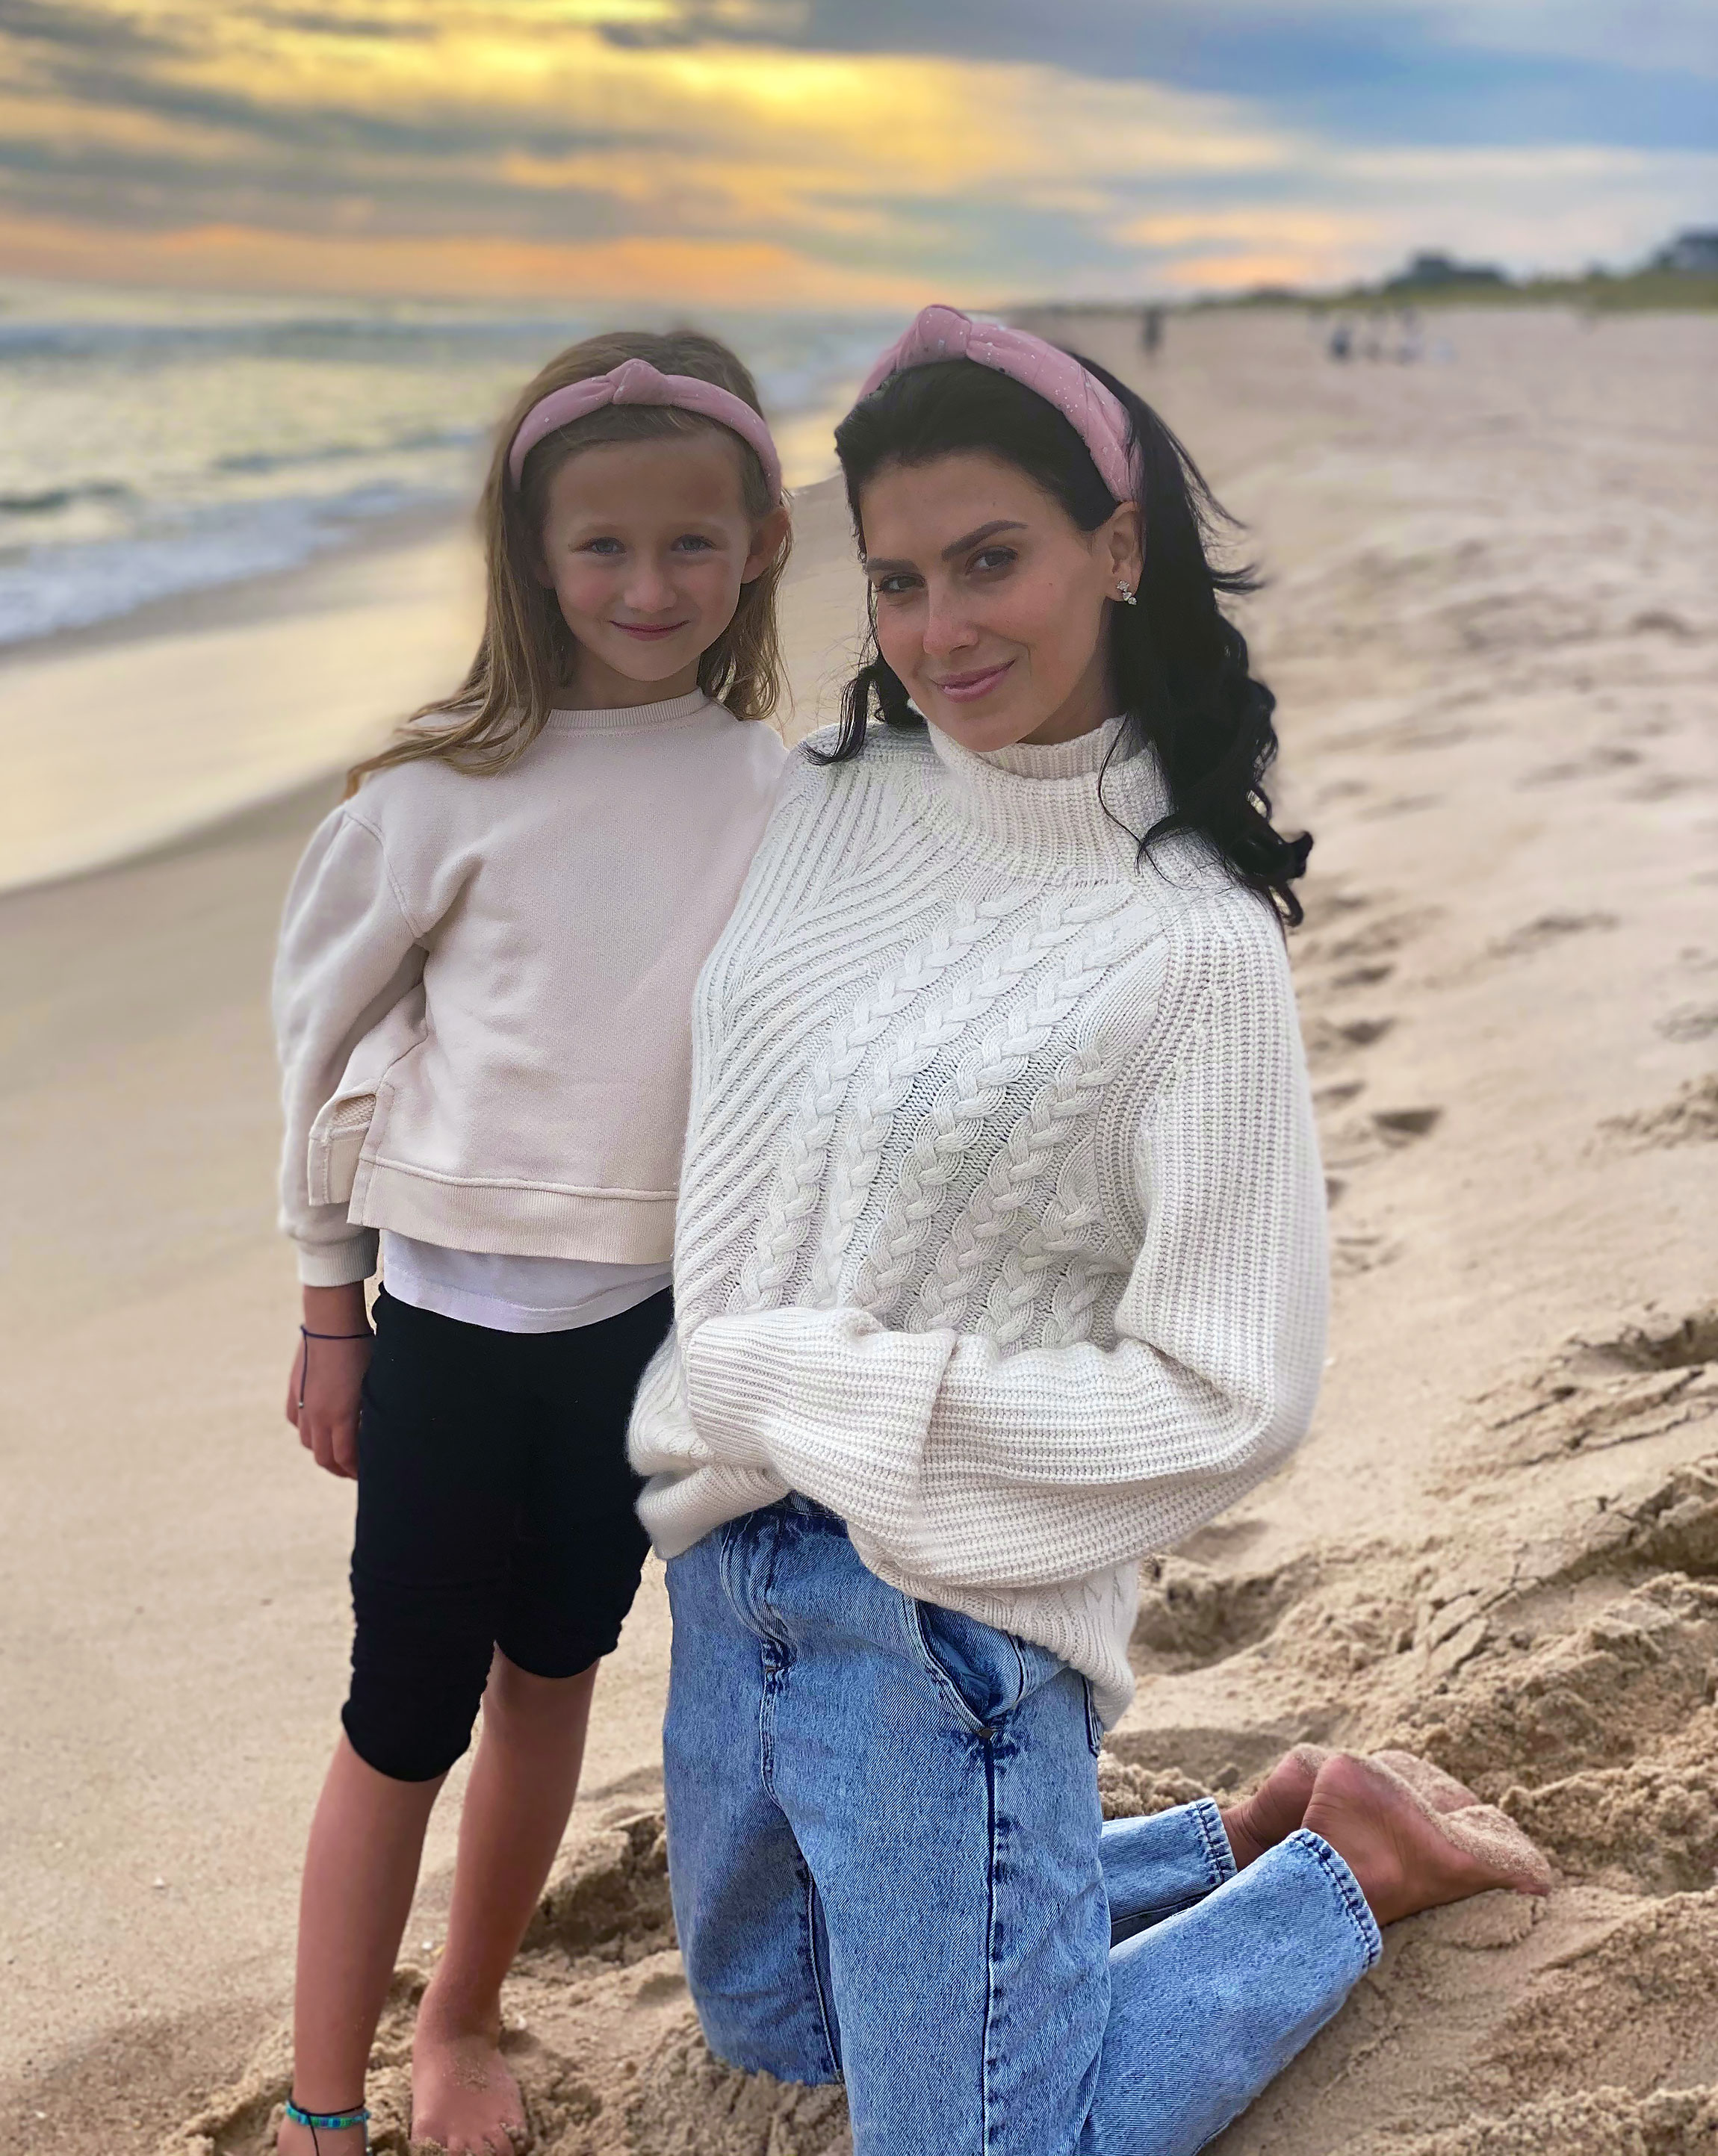 Hilaria Baldwin dons cowboy boots and leggings one day after being